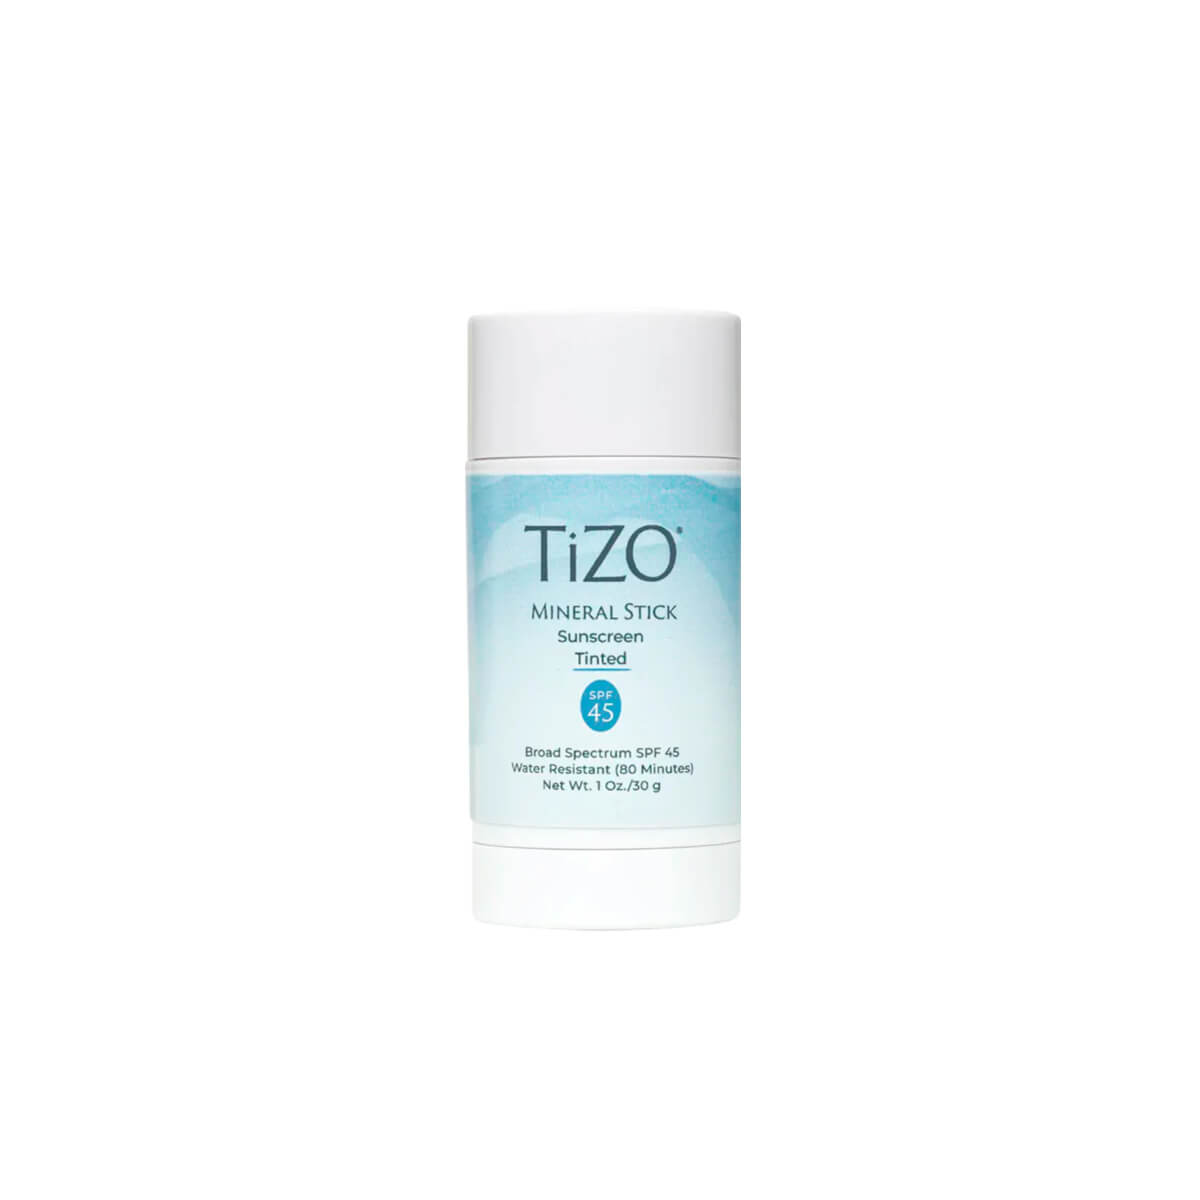 TIZO MINERAL STICK TINTED SPF 45+ 30 G | The Glow Shop